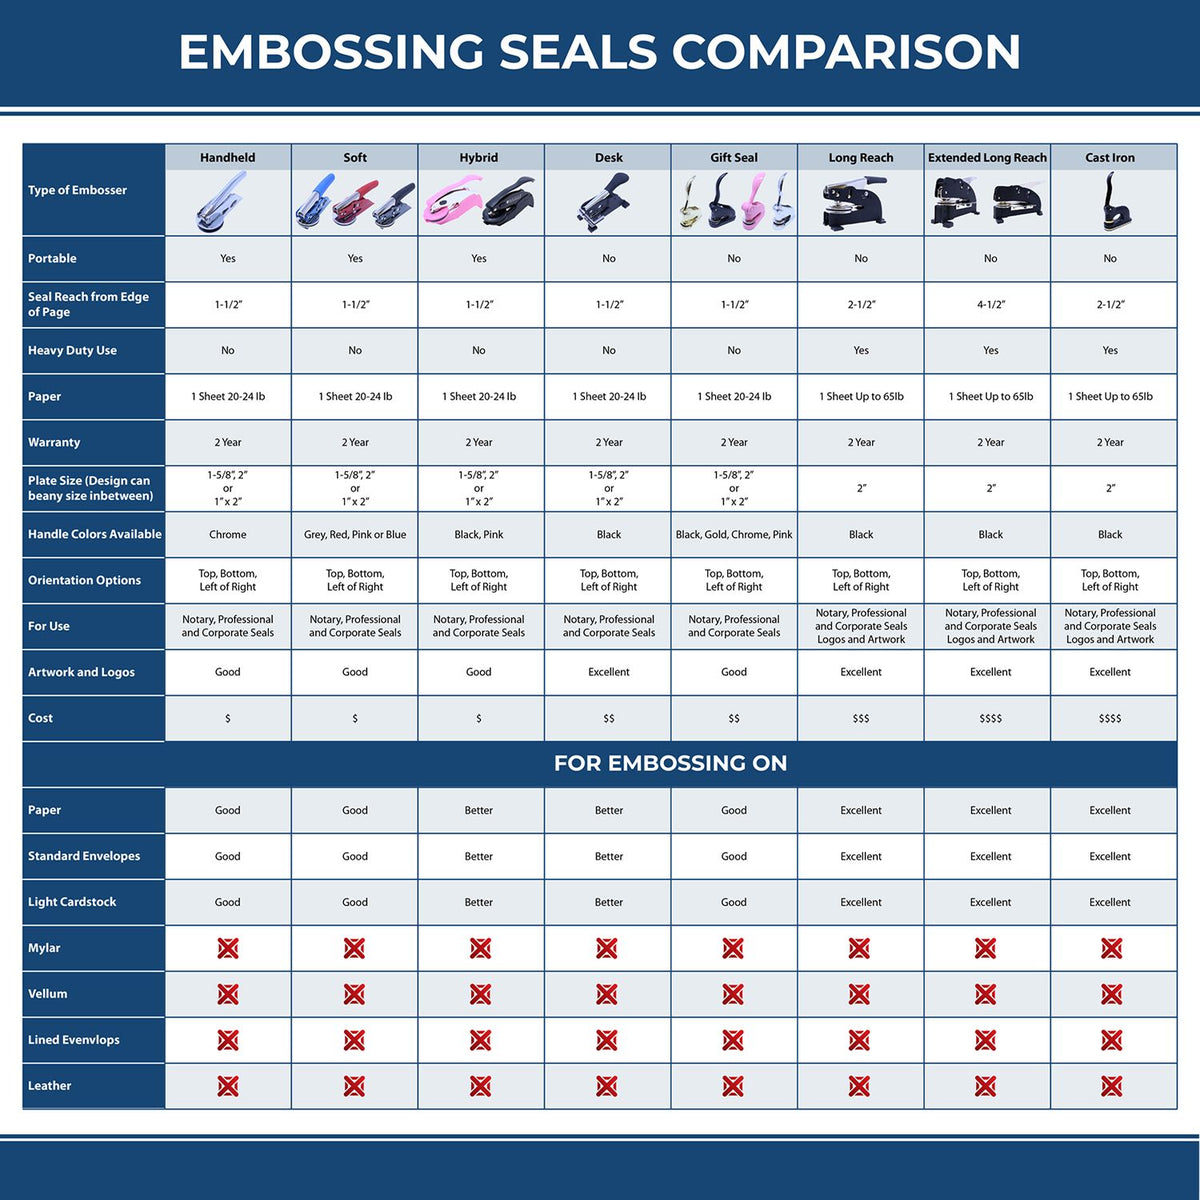 A comparison chart for the different types of mount models available for the Extended Long Reach District of Columbia Surveyor Embosser.